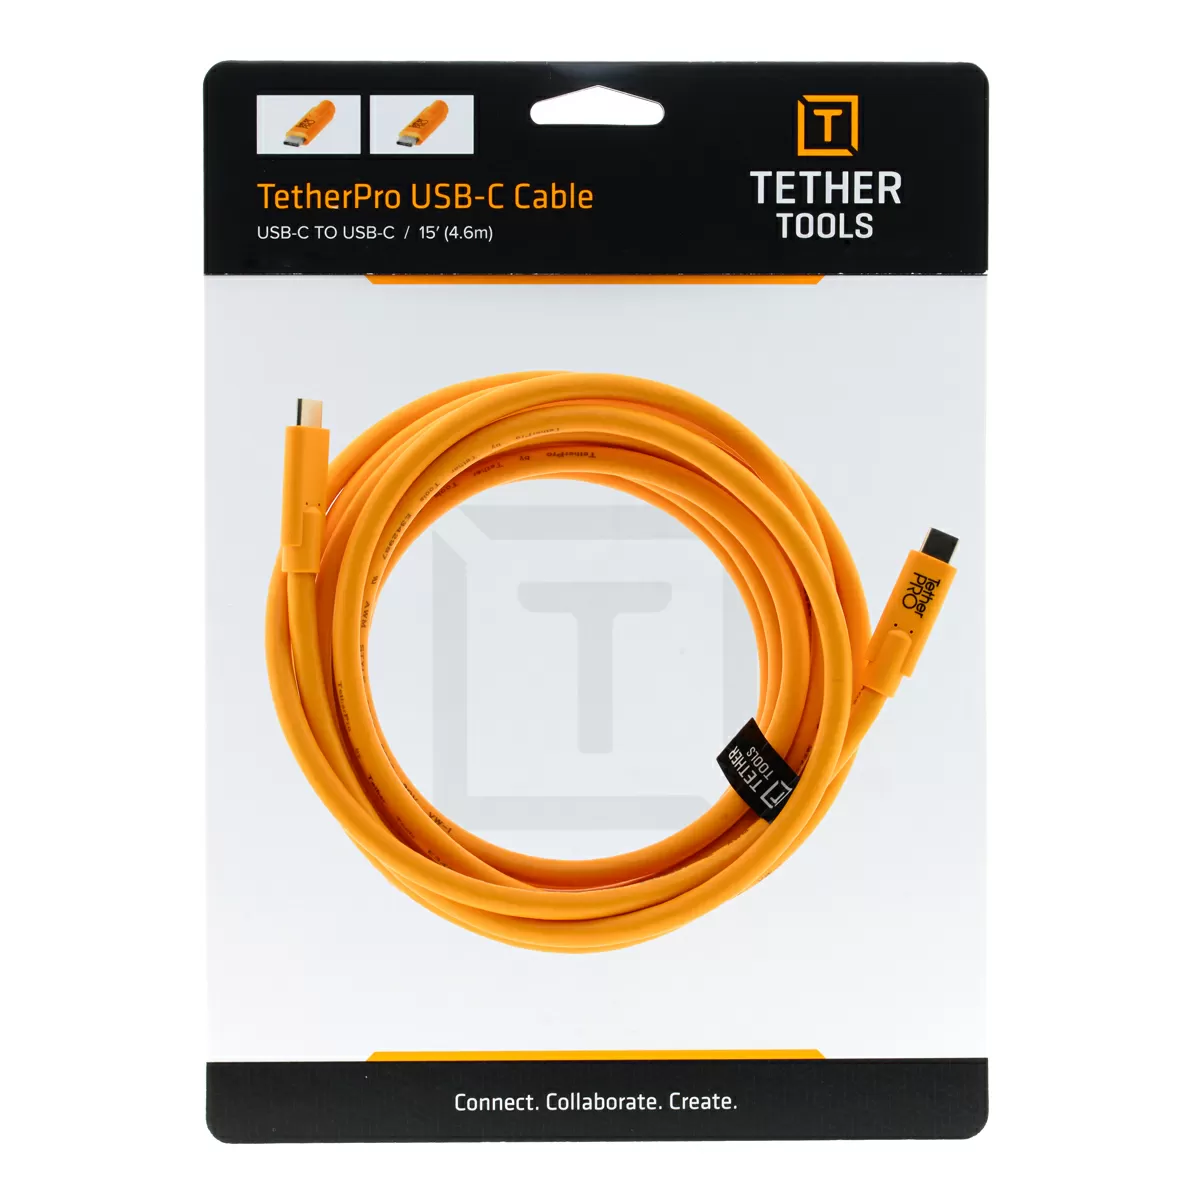 Tether tools